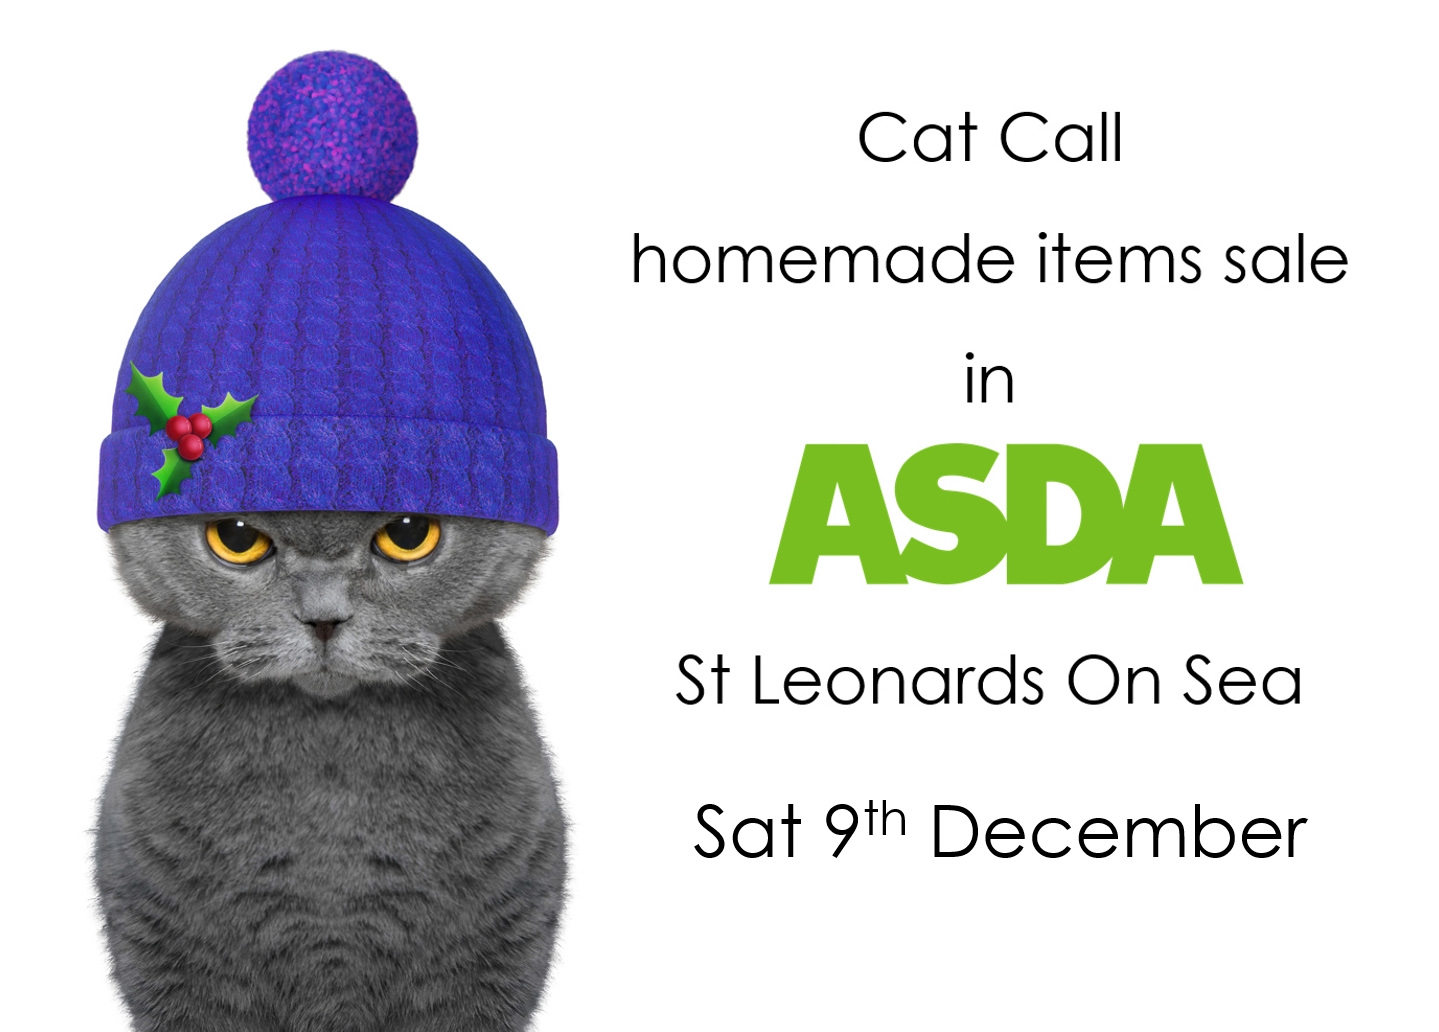 Cat Call charity table sale in Asda